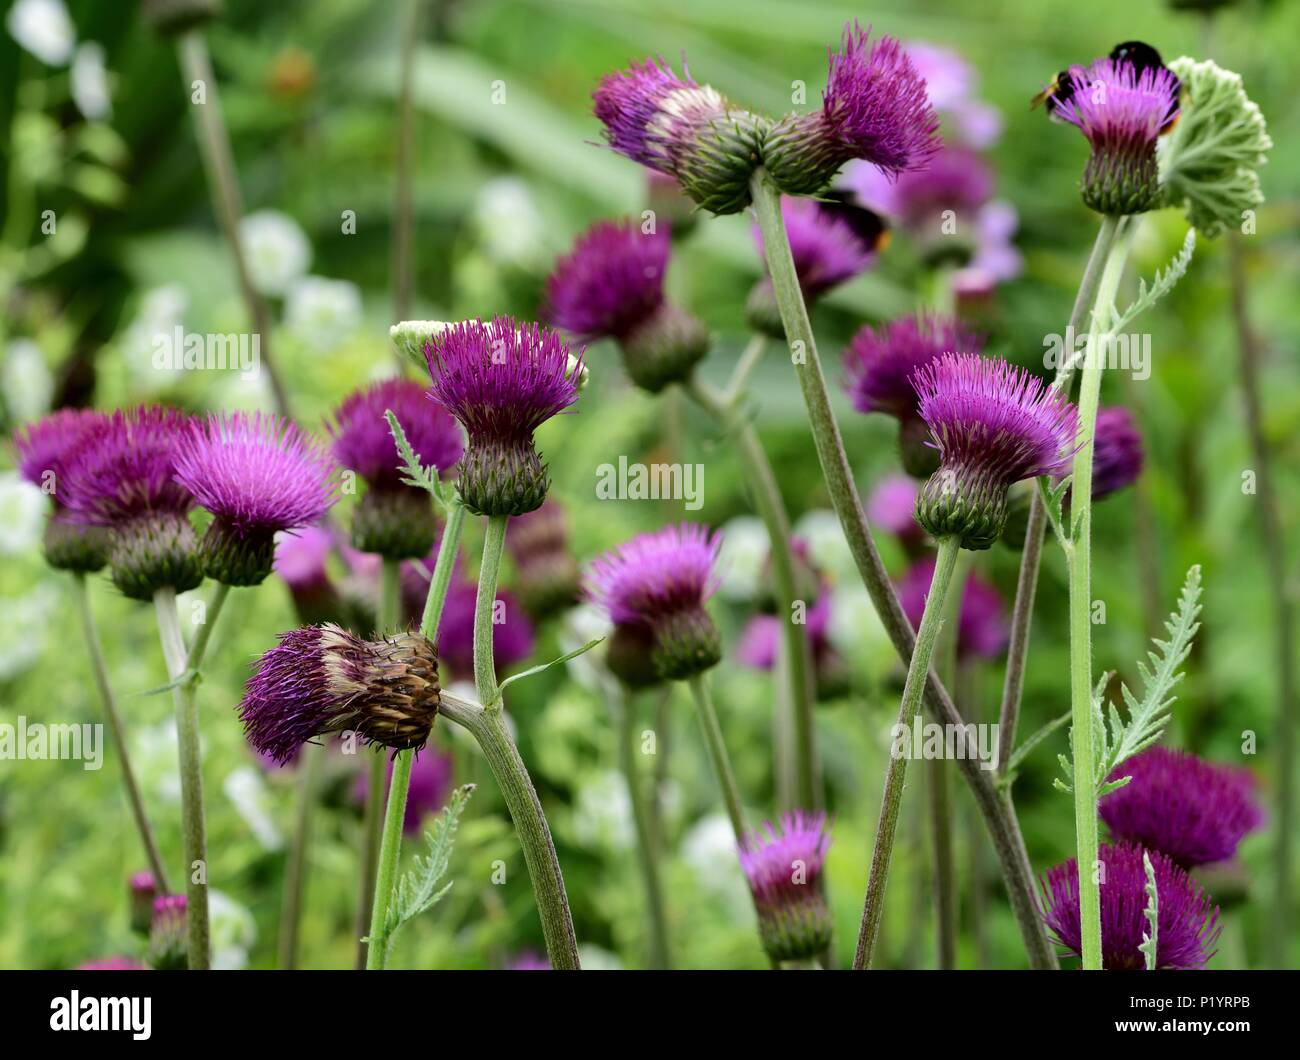 A clump of ornamental thistles in flower Stock Photo